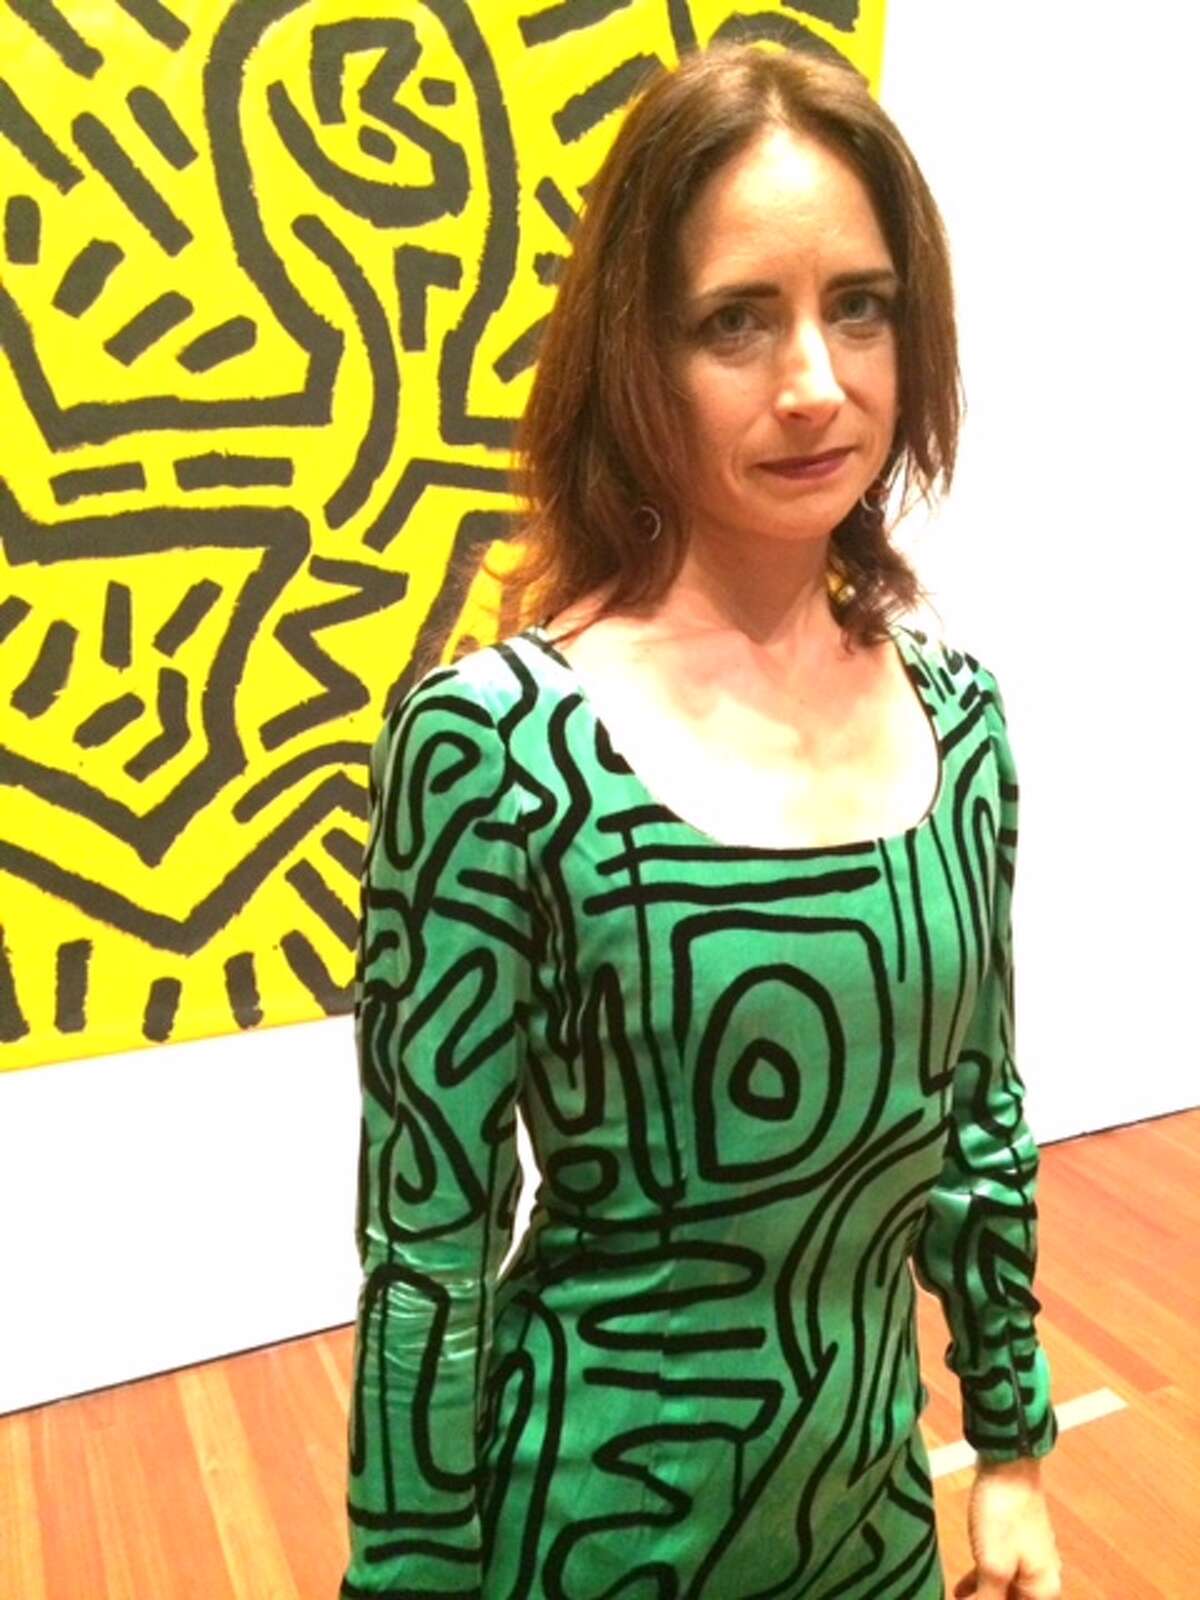 Kristen Haring; dress fabric was designed by Keith